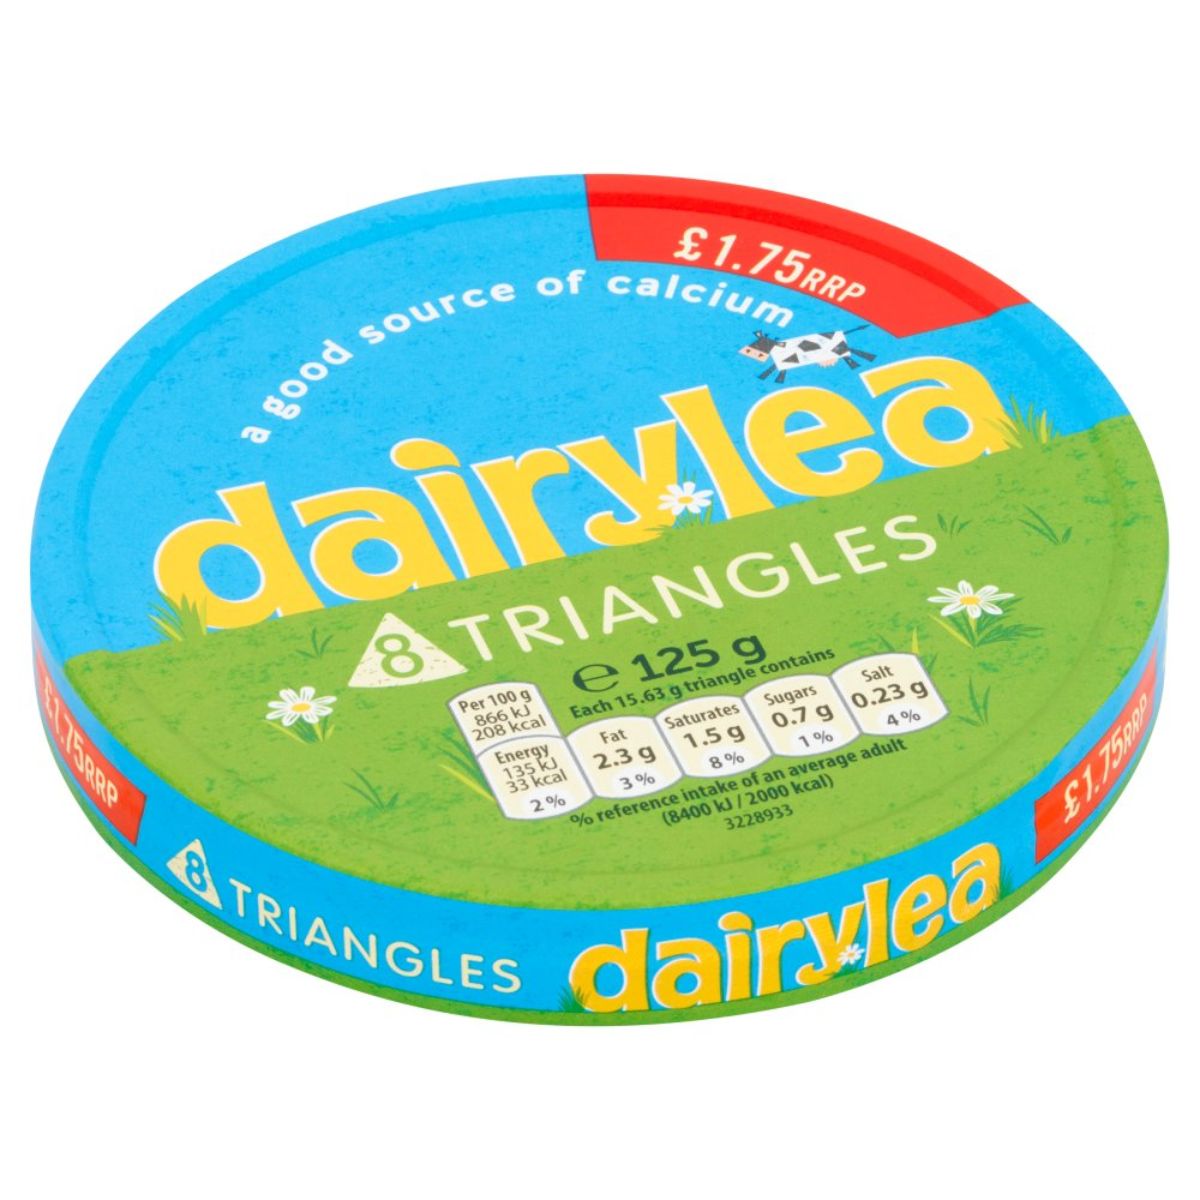 A tin of Dairylea - Cheese Triangles - 125g on a white background.